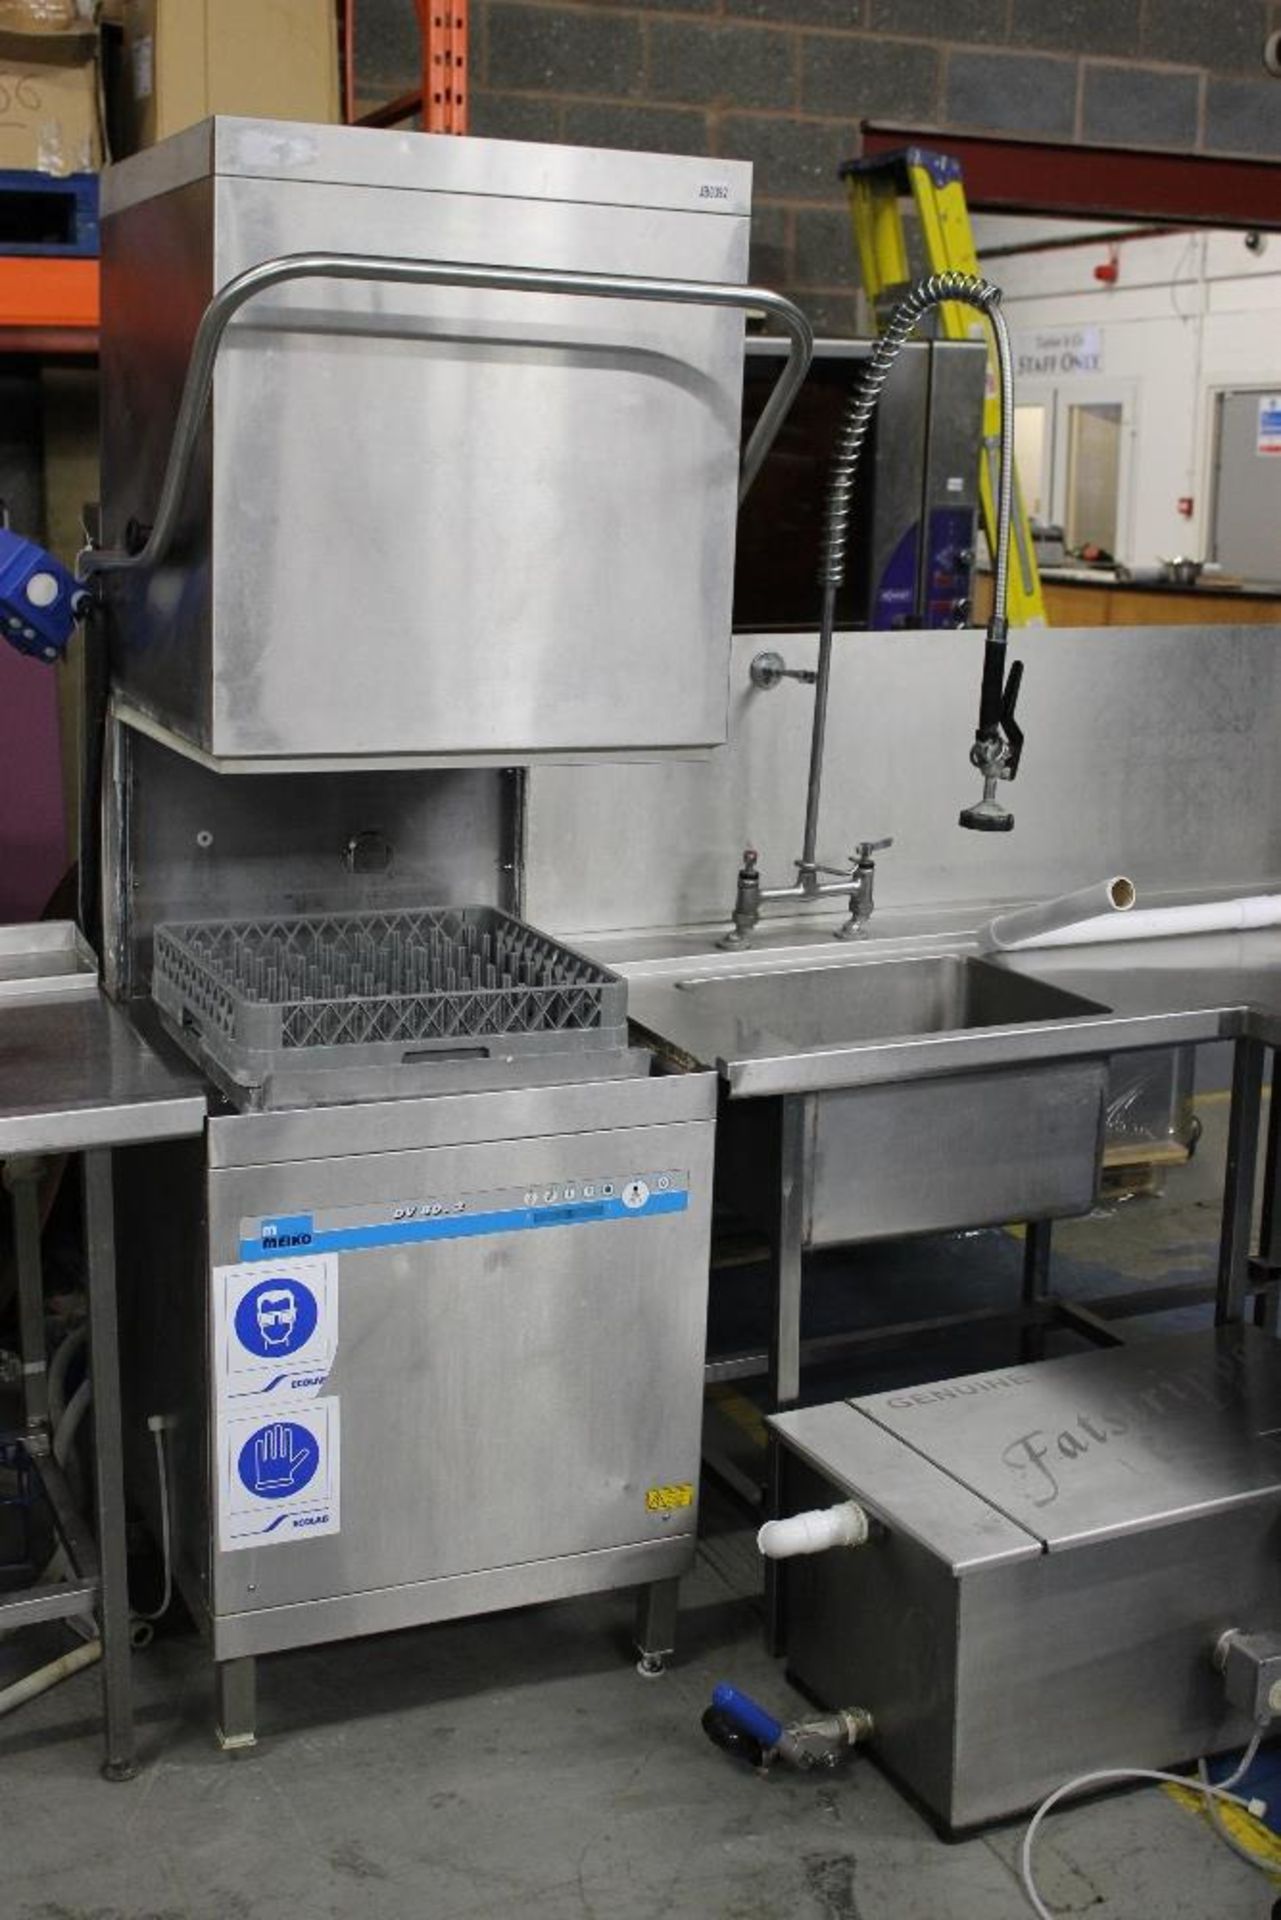 Meiko AV 80.2 Pass Through Dishwasher Complete Unit with Grease Trap Wash Baskets + Moffat Feed - Image 3 of 6